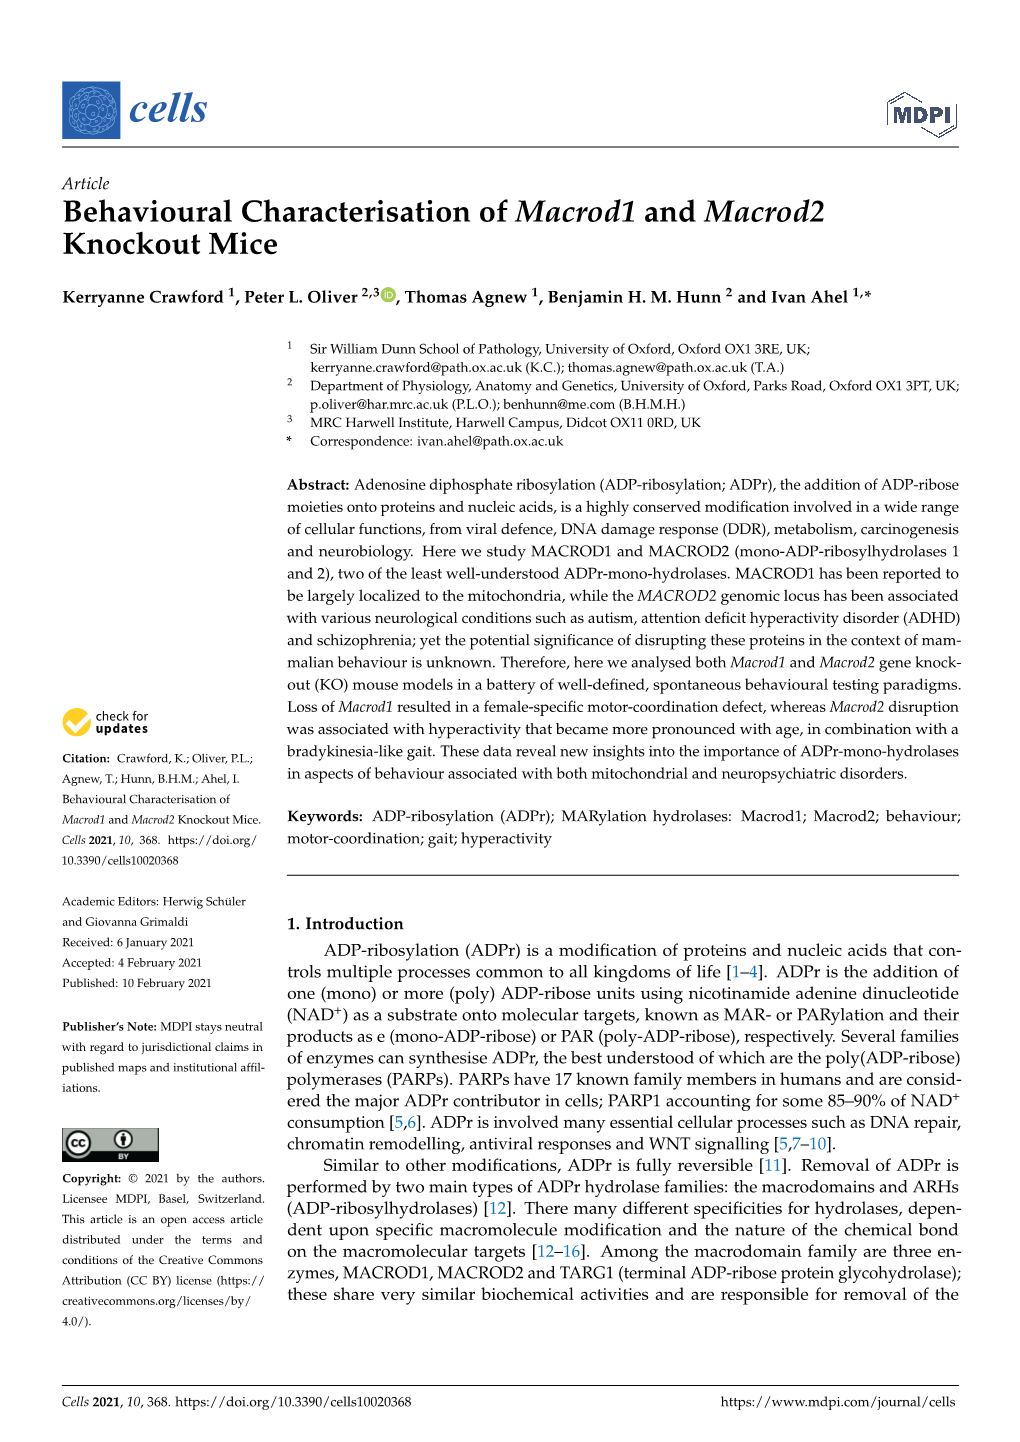 Behavioural Characterisation of Macrod1 and Macrod2 Knockout Mice